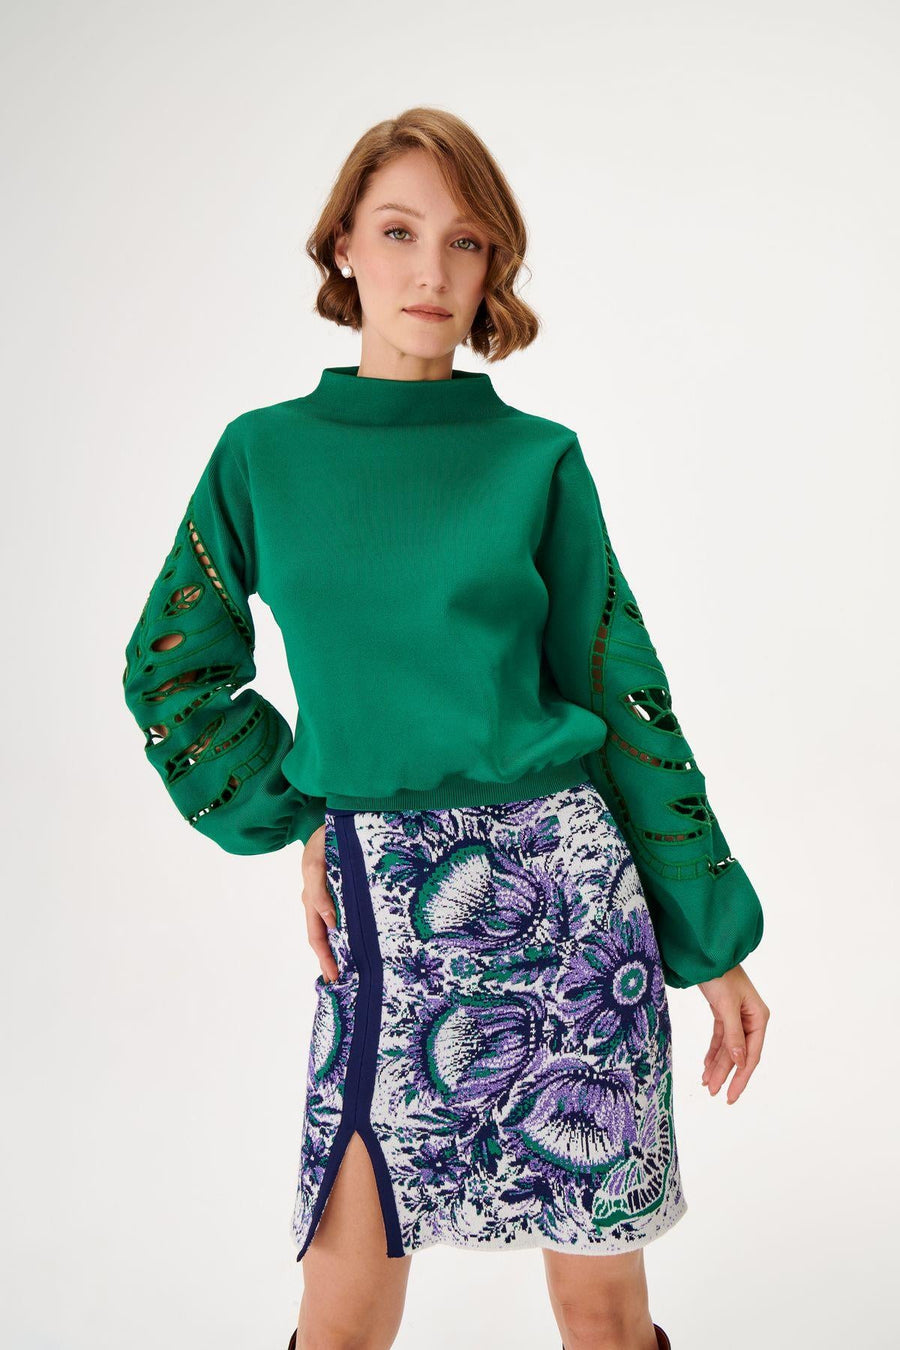 Mandarin Collar Green Knit Sweater With Embroidered Sleeves